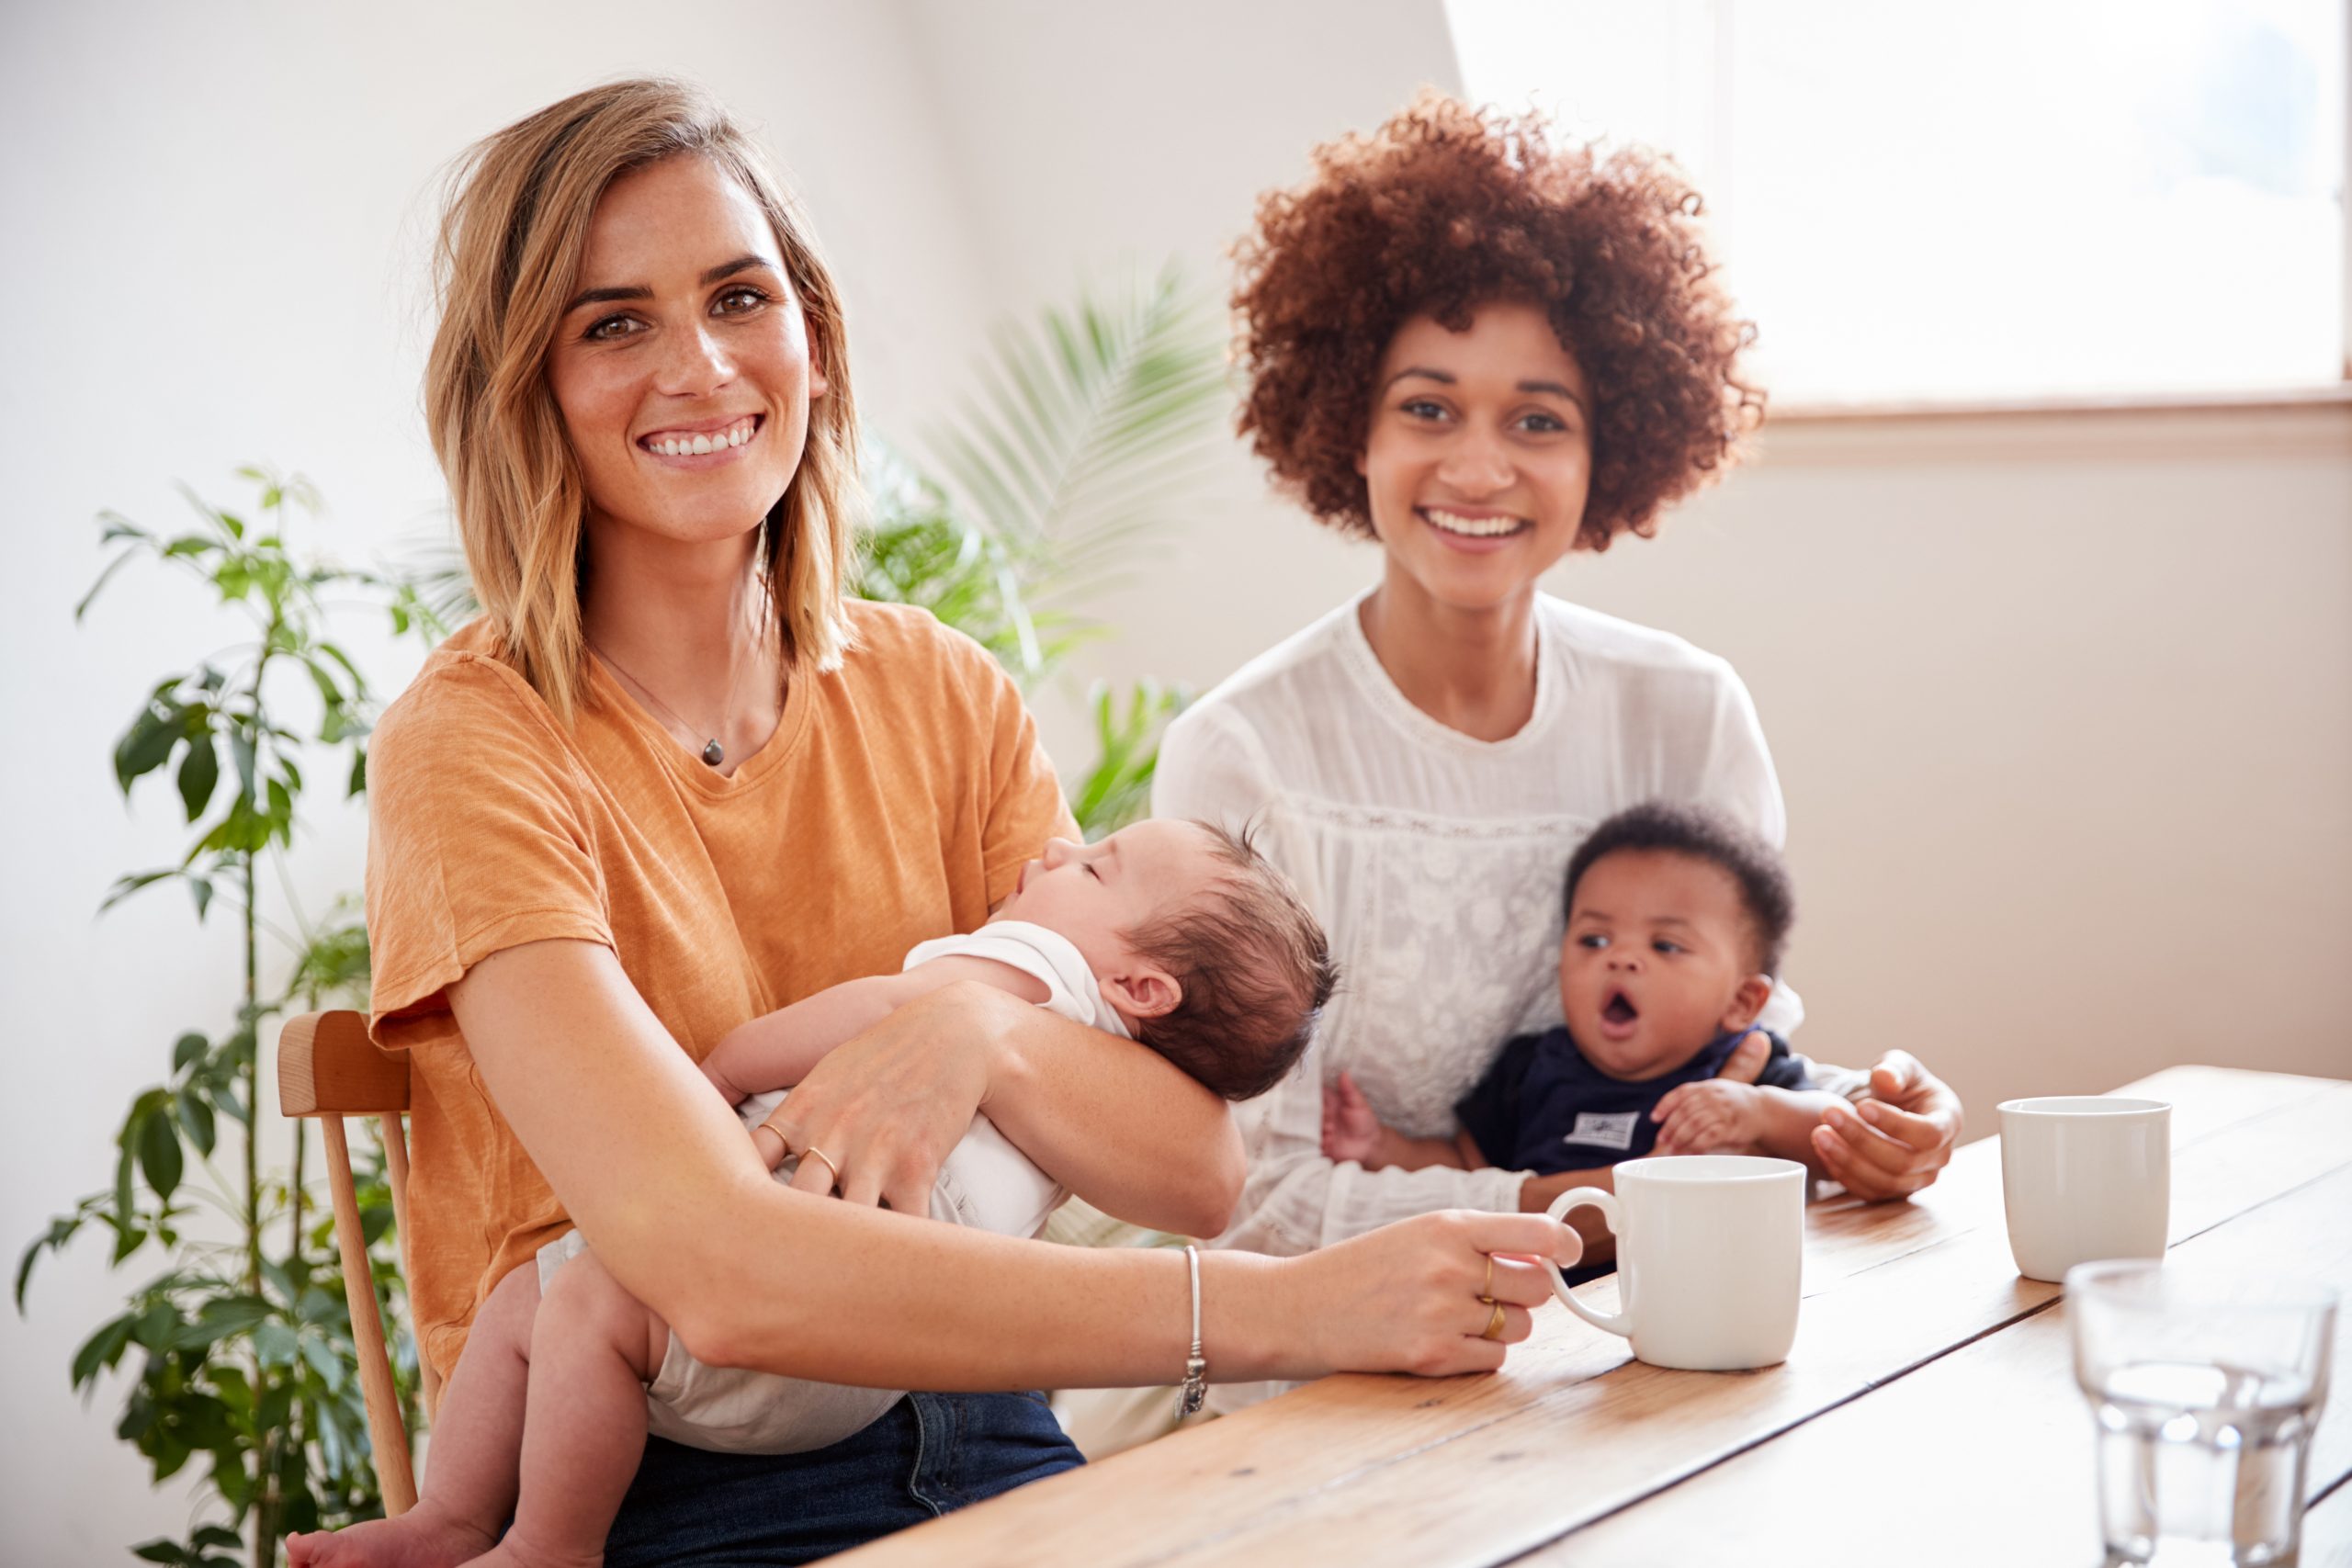 Portrait Of Two Mothers With Babies Meeting Around Table On Play Date At Home